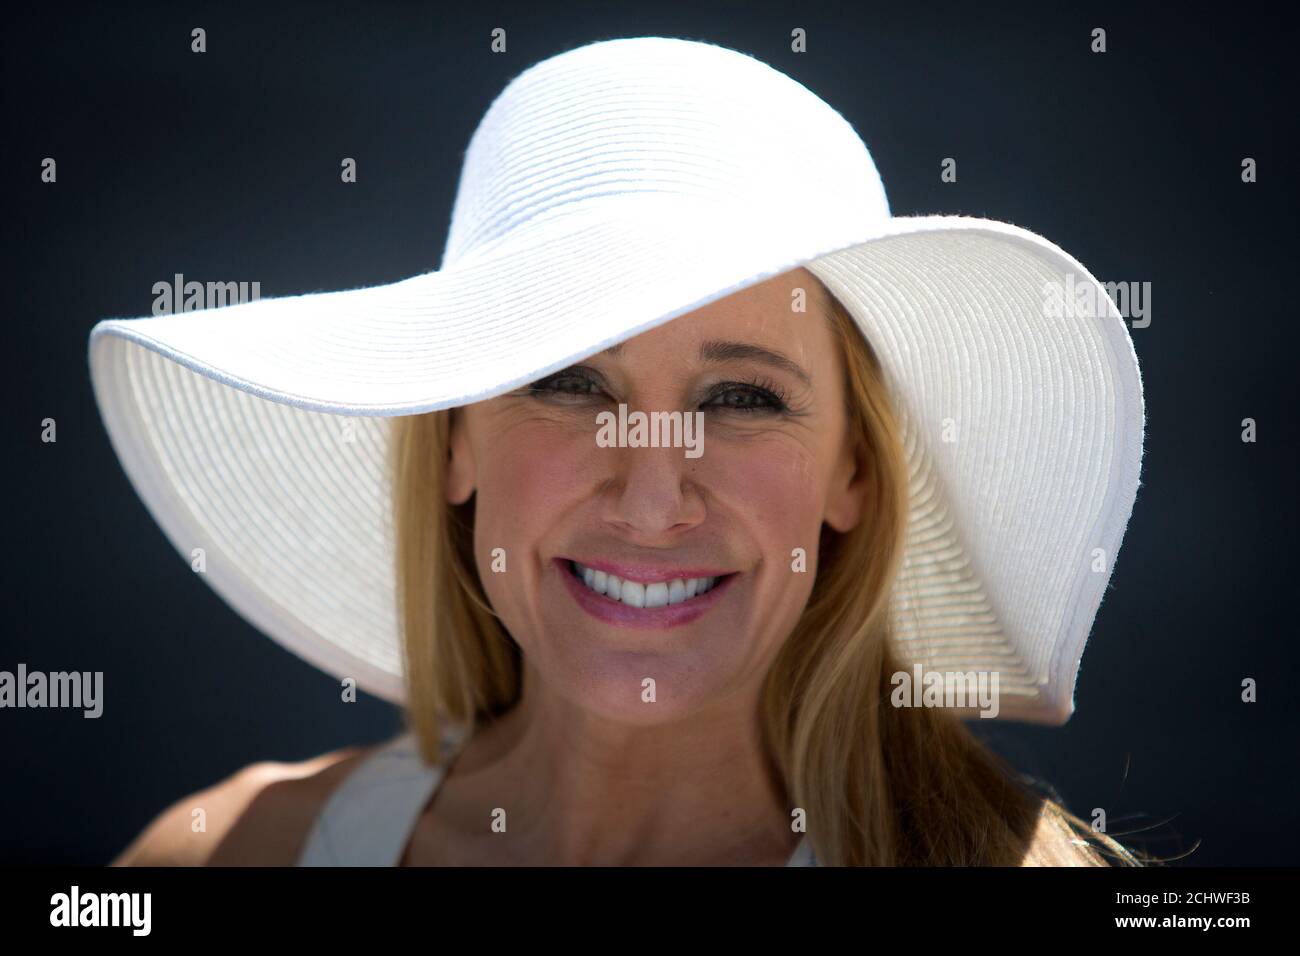 Diana Val poses for a  portrait with her hat before the 146th running of the 2014 Belmont Stakes in Elmont, New York June 7, 2014.      REUTERS/Carlo Allegri (UNITED STATES - Tags: SPORT HORSE RACING SOCIETY FASHION) Stock Photo